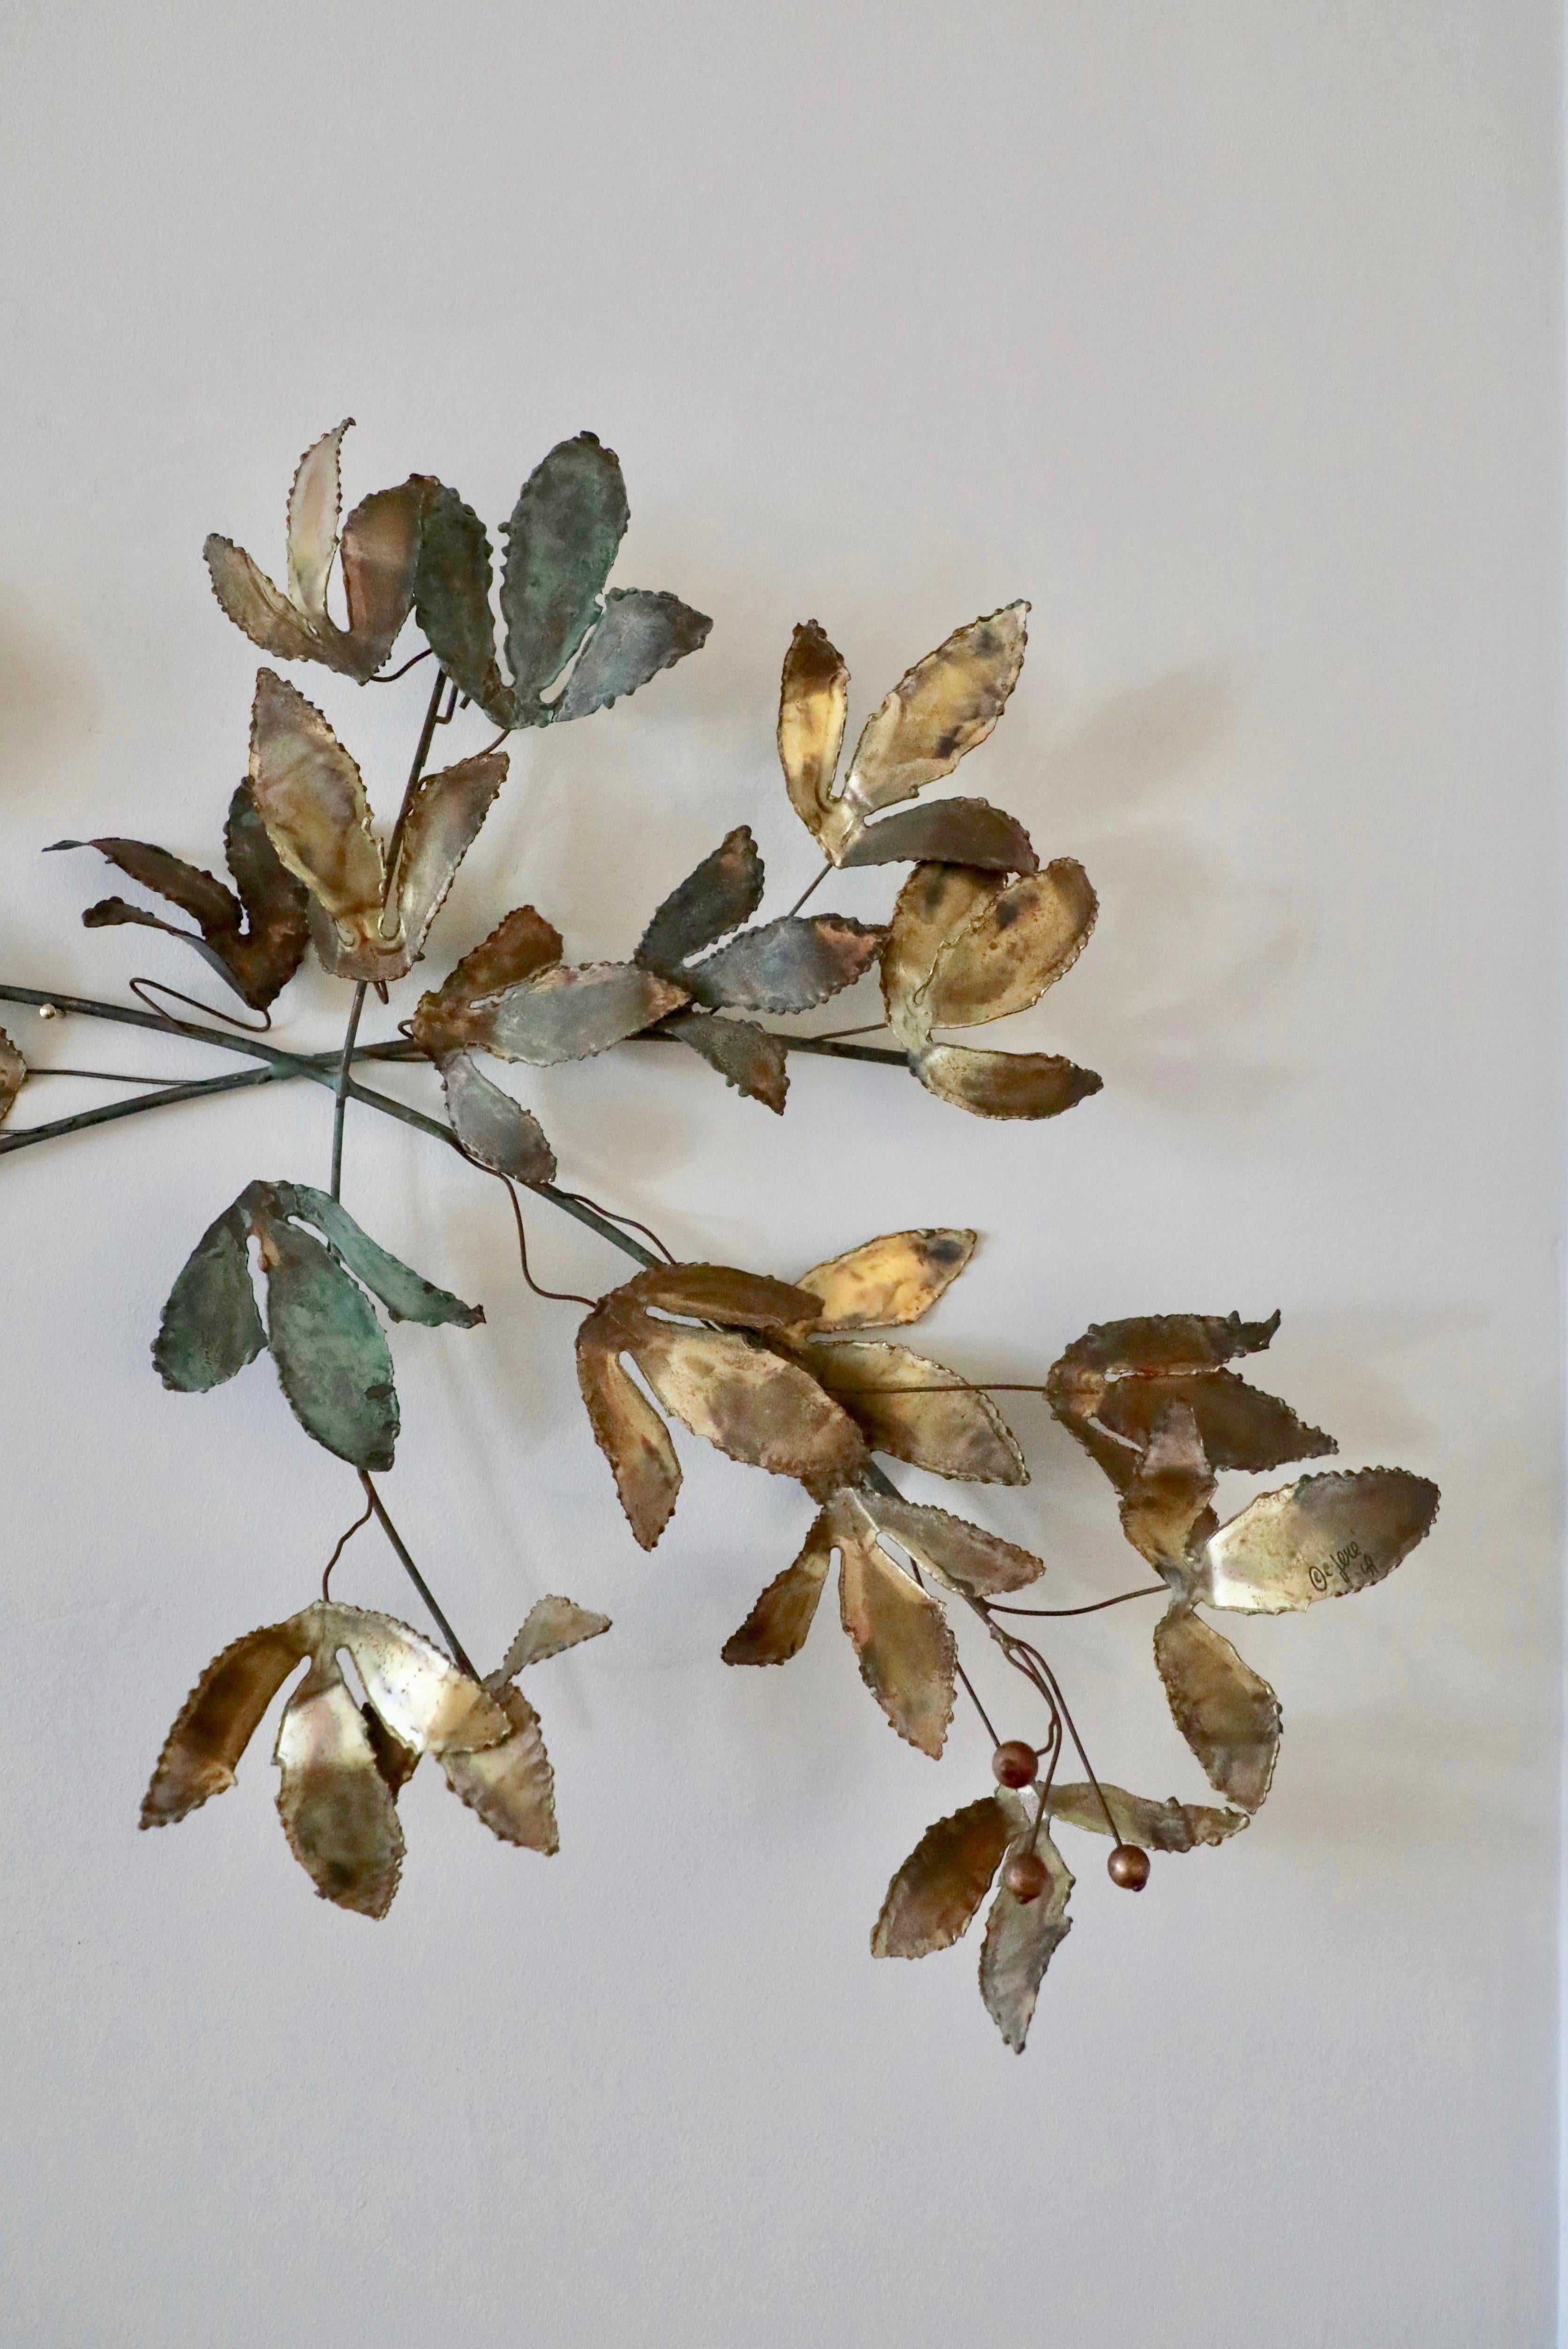 This is an especially beautiful mixed metal wall sculpture designed by C.Jeré and manufactured by Artisan House in California in 1969.  This design is an early, iconic one and makes a nice alternative to a painting.  The metal leaves reflect the